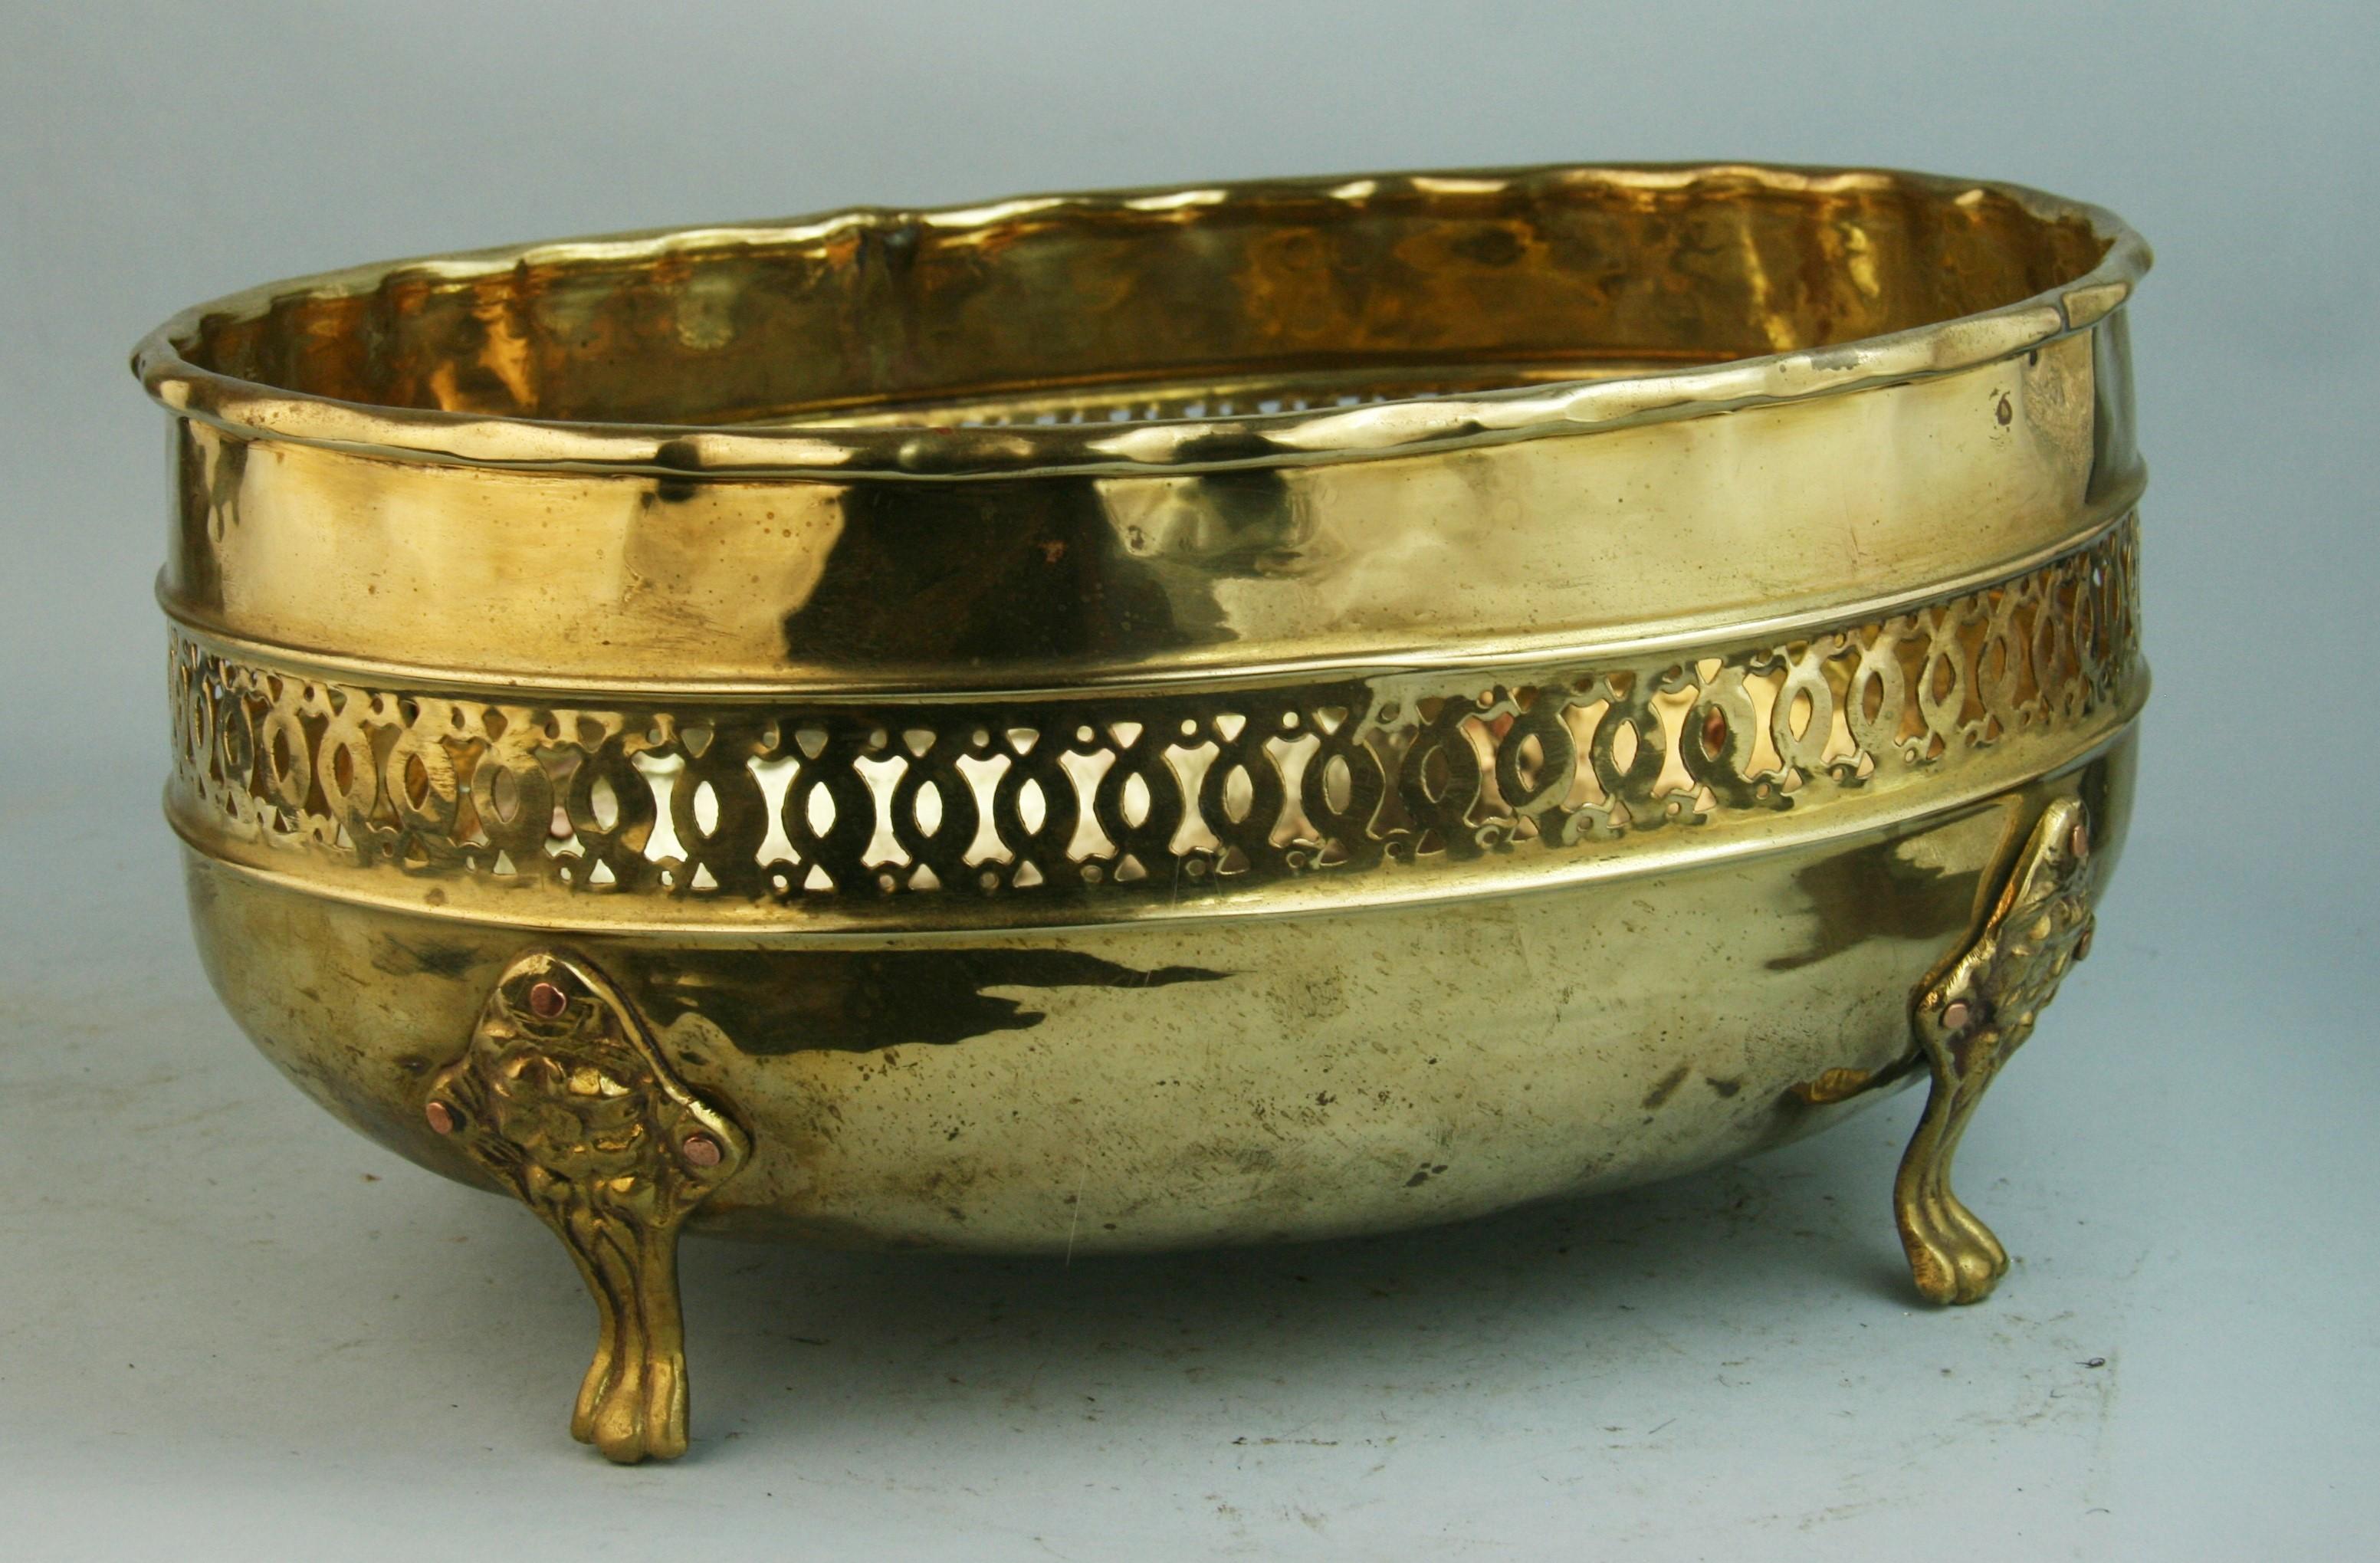 1241 Hammered brass finely detailed cache pot.